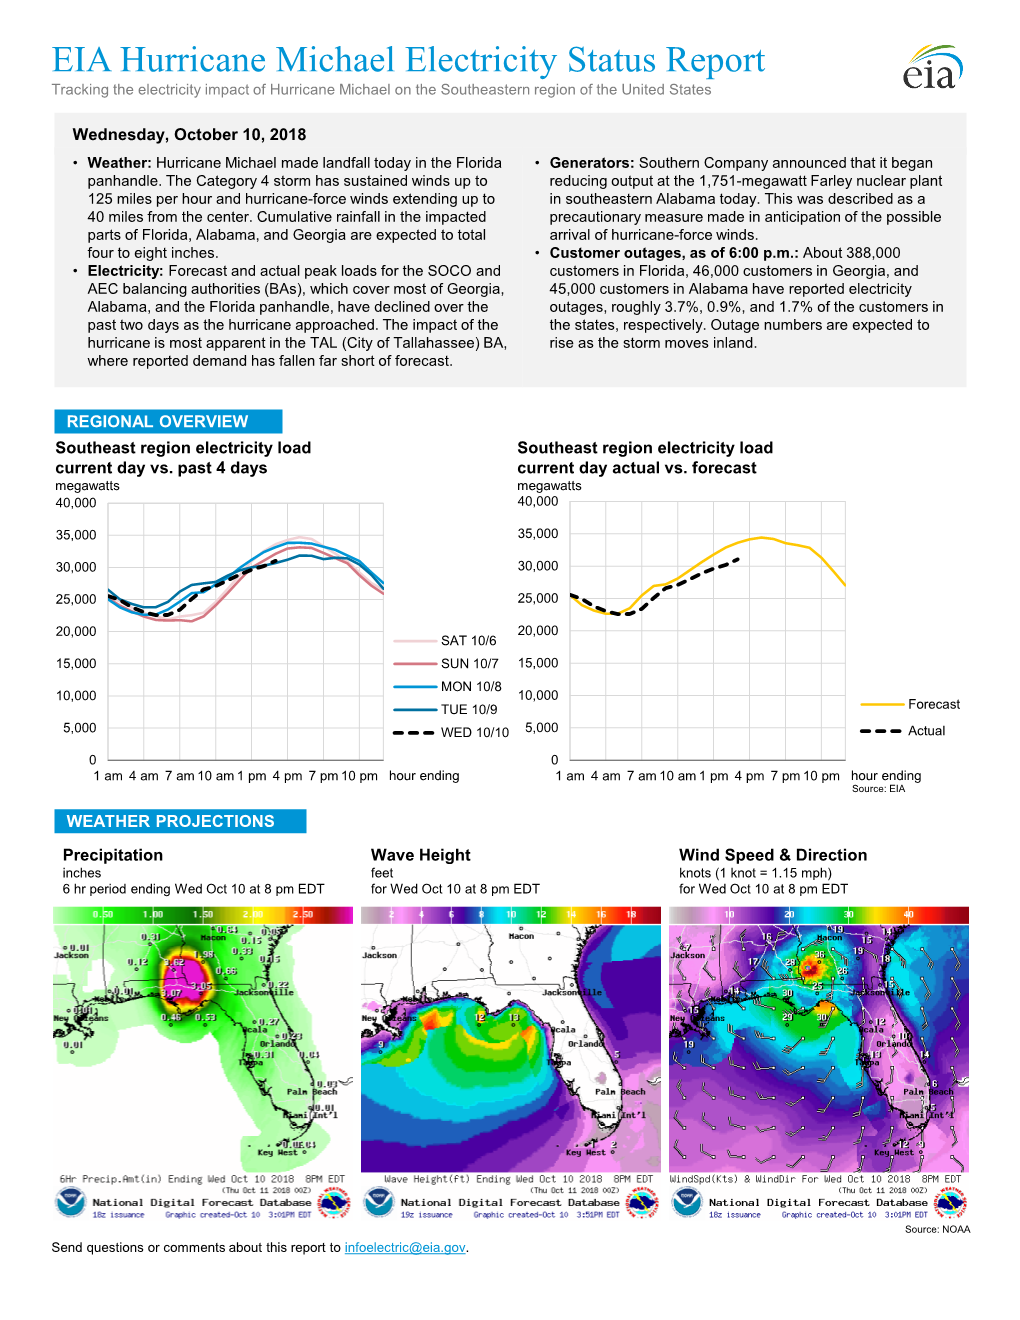 Hurricane Michael Electricity Status Report Tracking the Electricity Impact of Hurricane Michael on the Southeastern Region of the United States